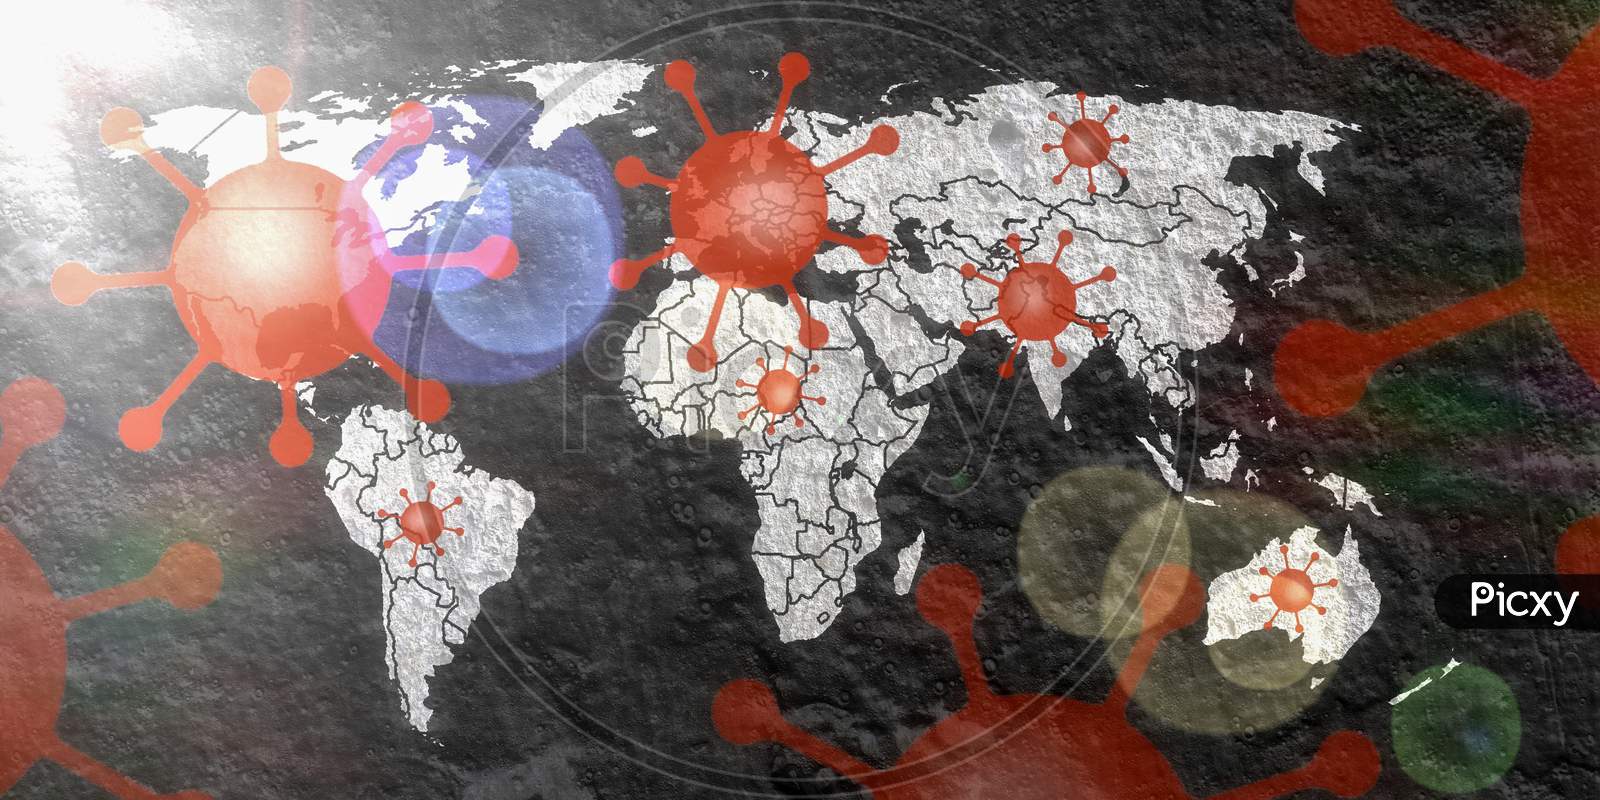 Illustration of a world map showing the corona virus covid-19 hotspots in the United States and Europe